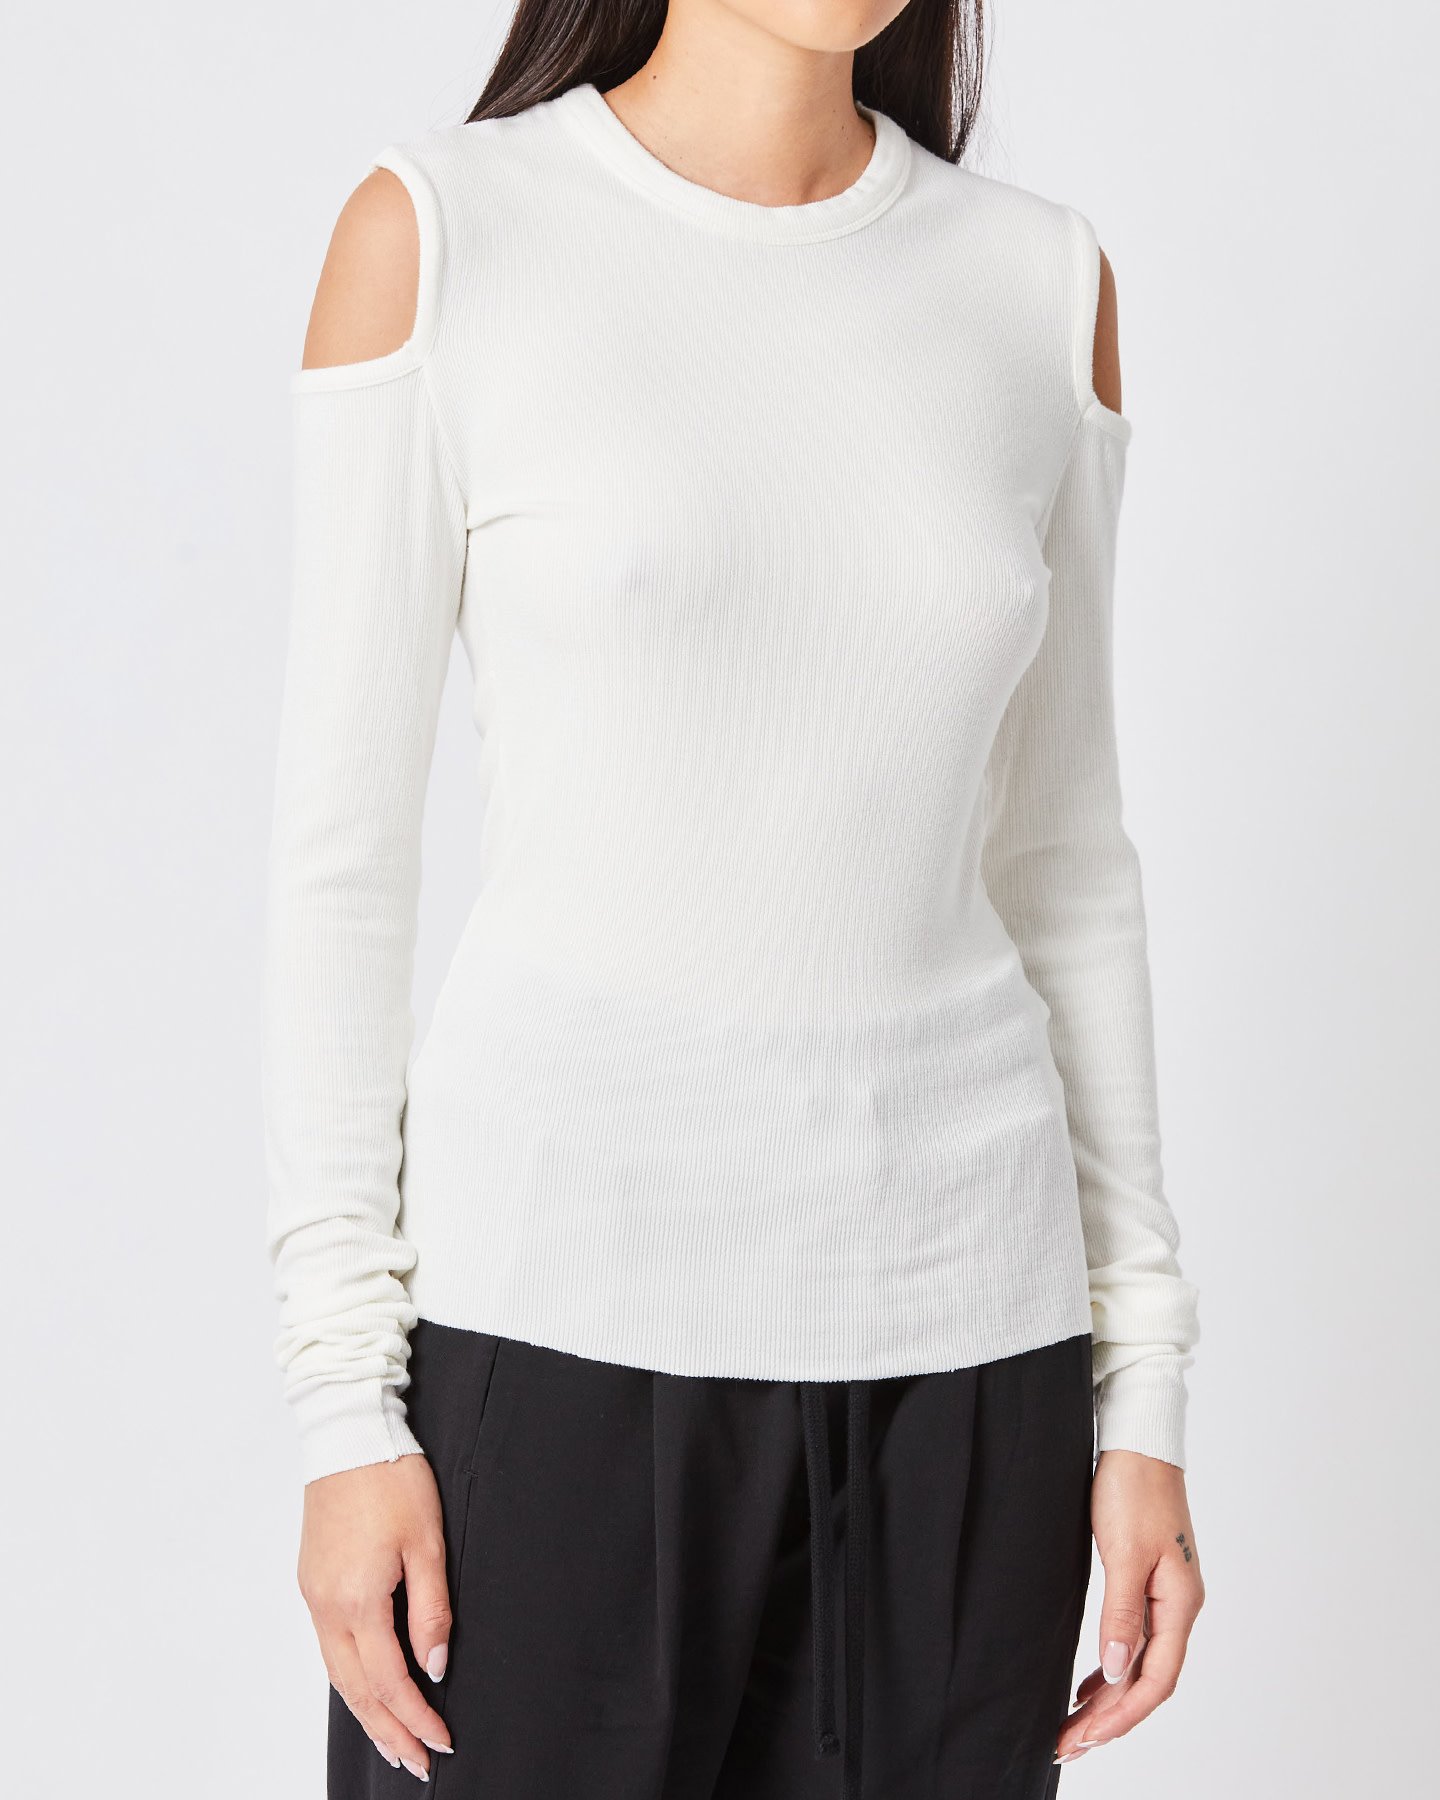 RIBBED MODAL CUT-OUT SHOULDER LONGSLEEVE - WHITE - Shop Untitled NYC